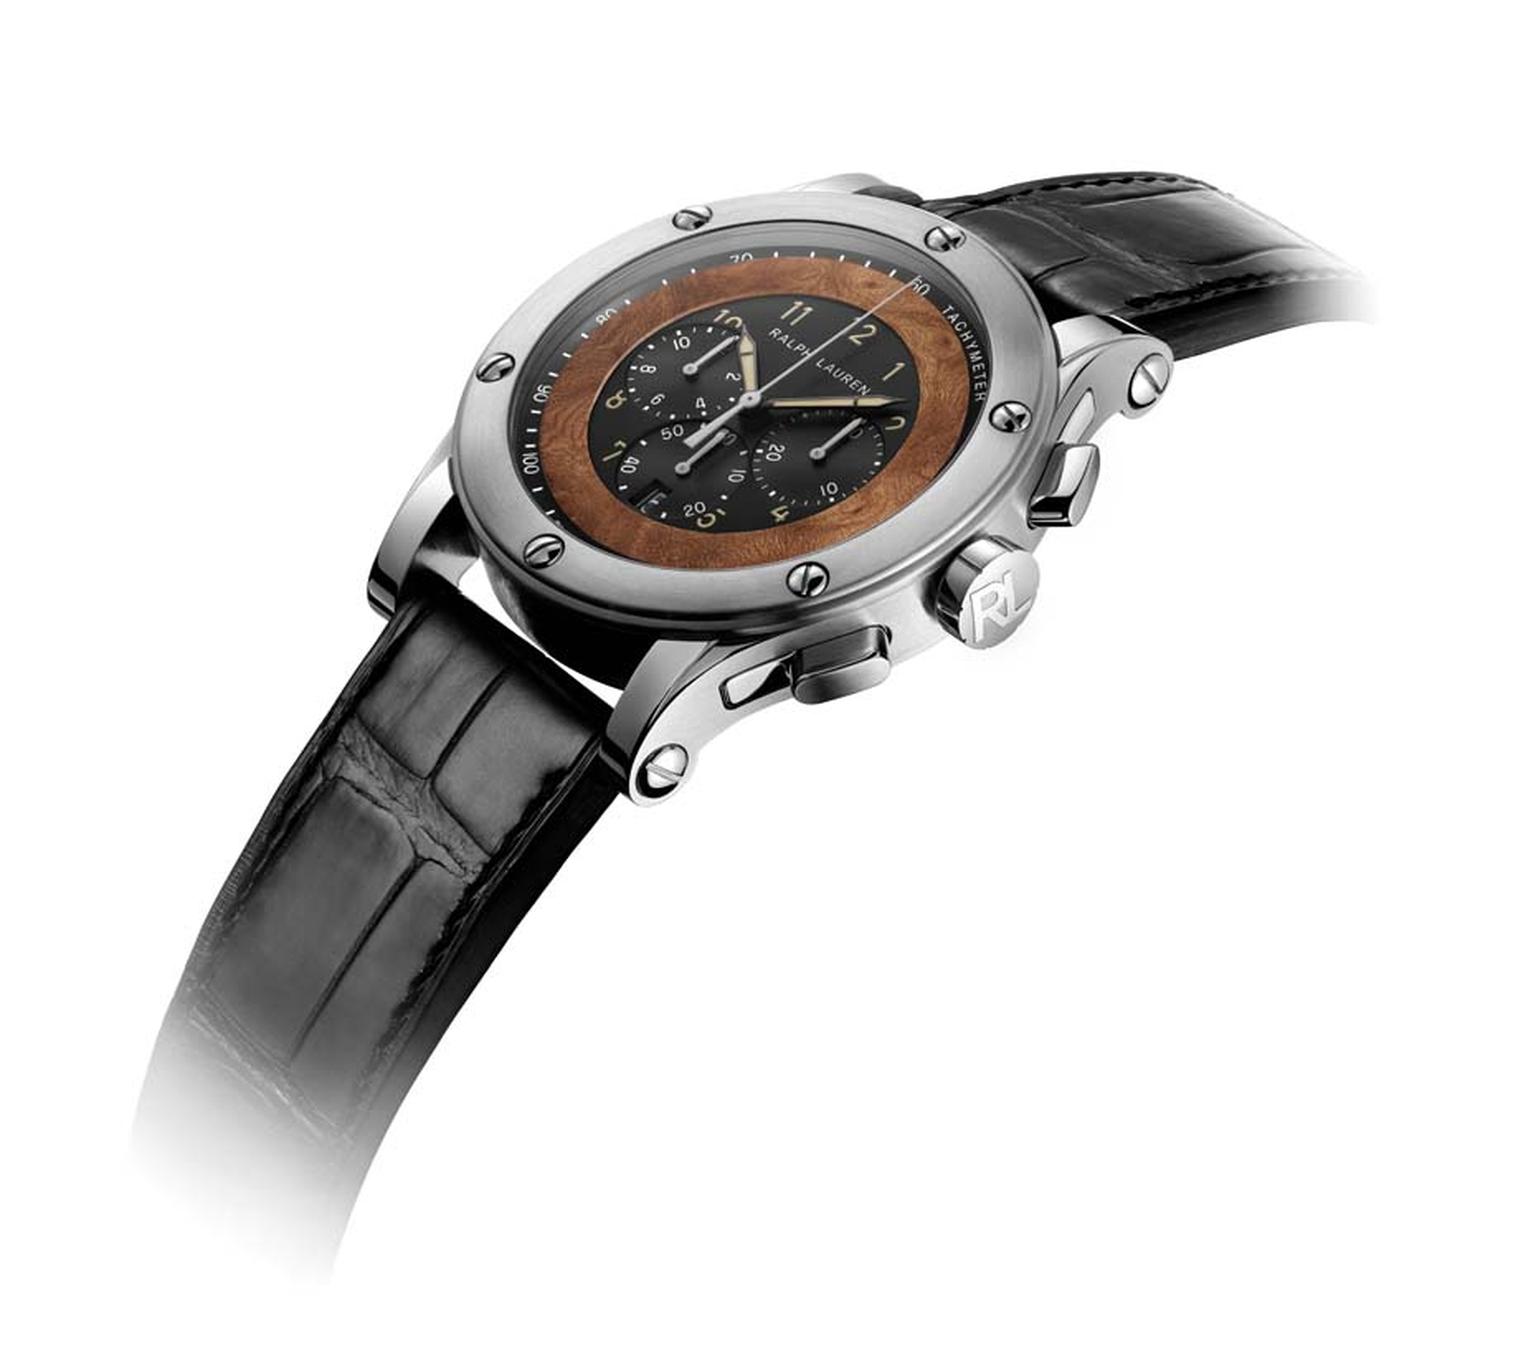 The new Ralph Lauren 45 mm Automotive Chronograph watch is a wonderful tribute to one of Ralph Lauren’s favourite cars, his sleek Bugatti 57CS Coupé, which car enthusiasts around the world will remember as the winner of the Villa d’Este automobile beauty 